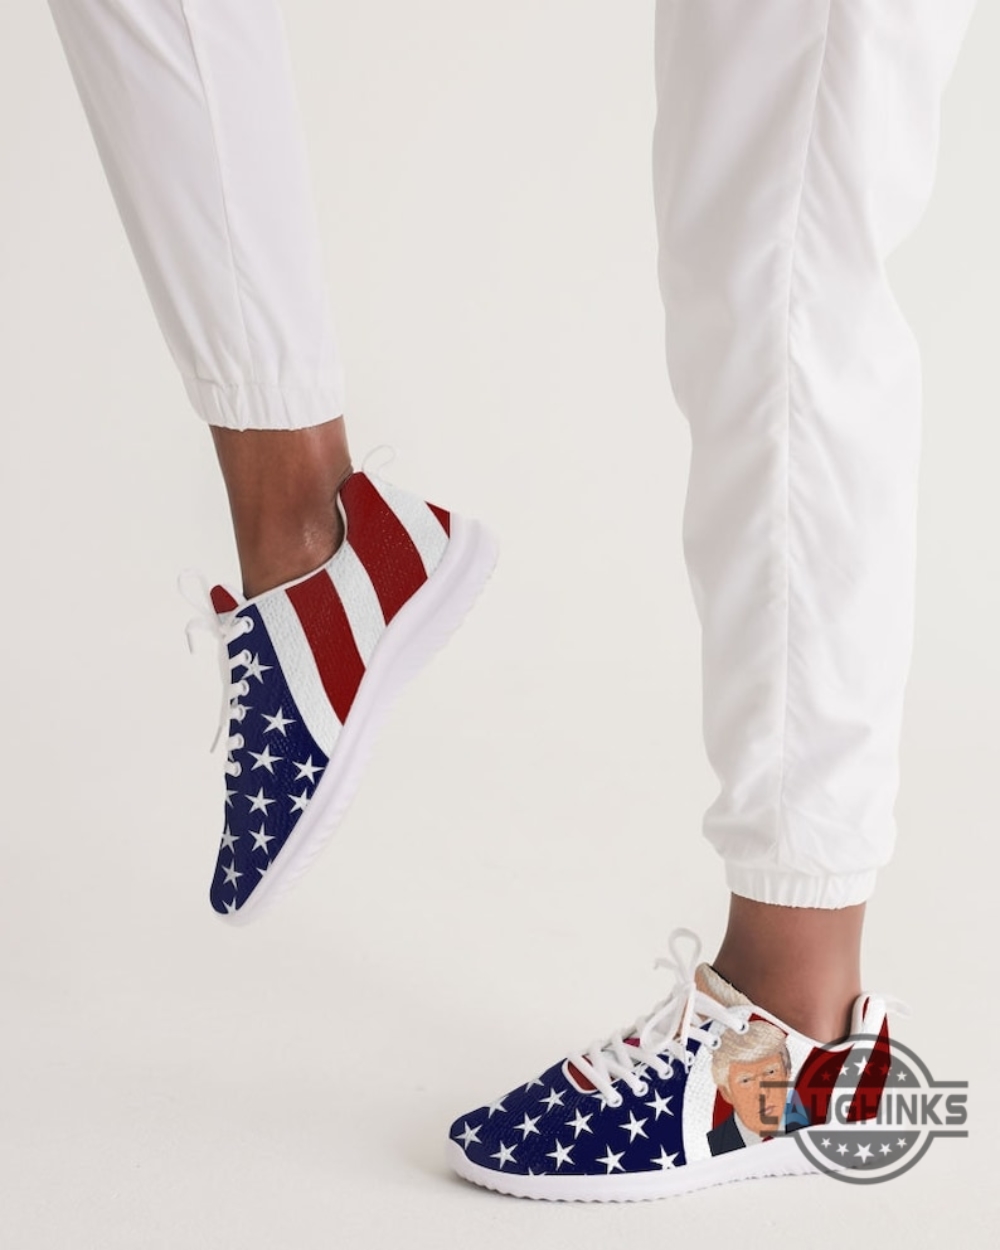 Trump Shoes For Sale President Donald Trump Sneakers Womens Mens Usa Flag Tennis Shoes American Conservative Patriotic Footwear